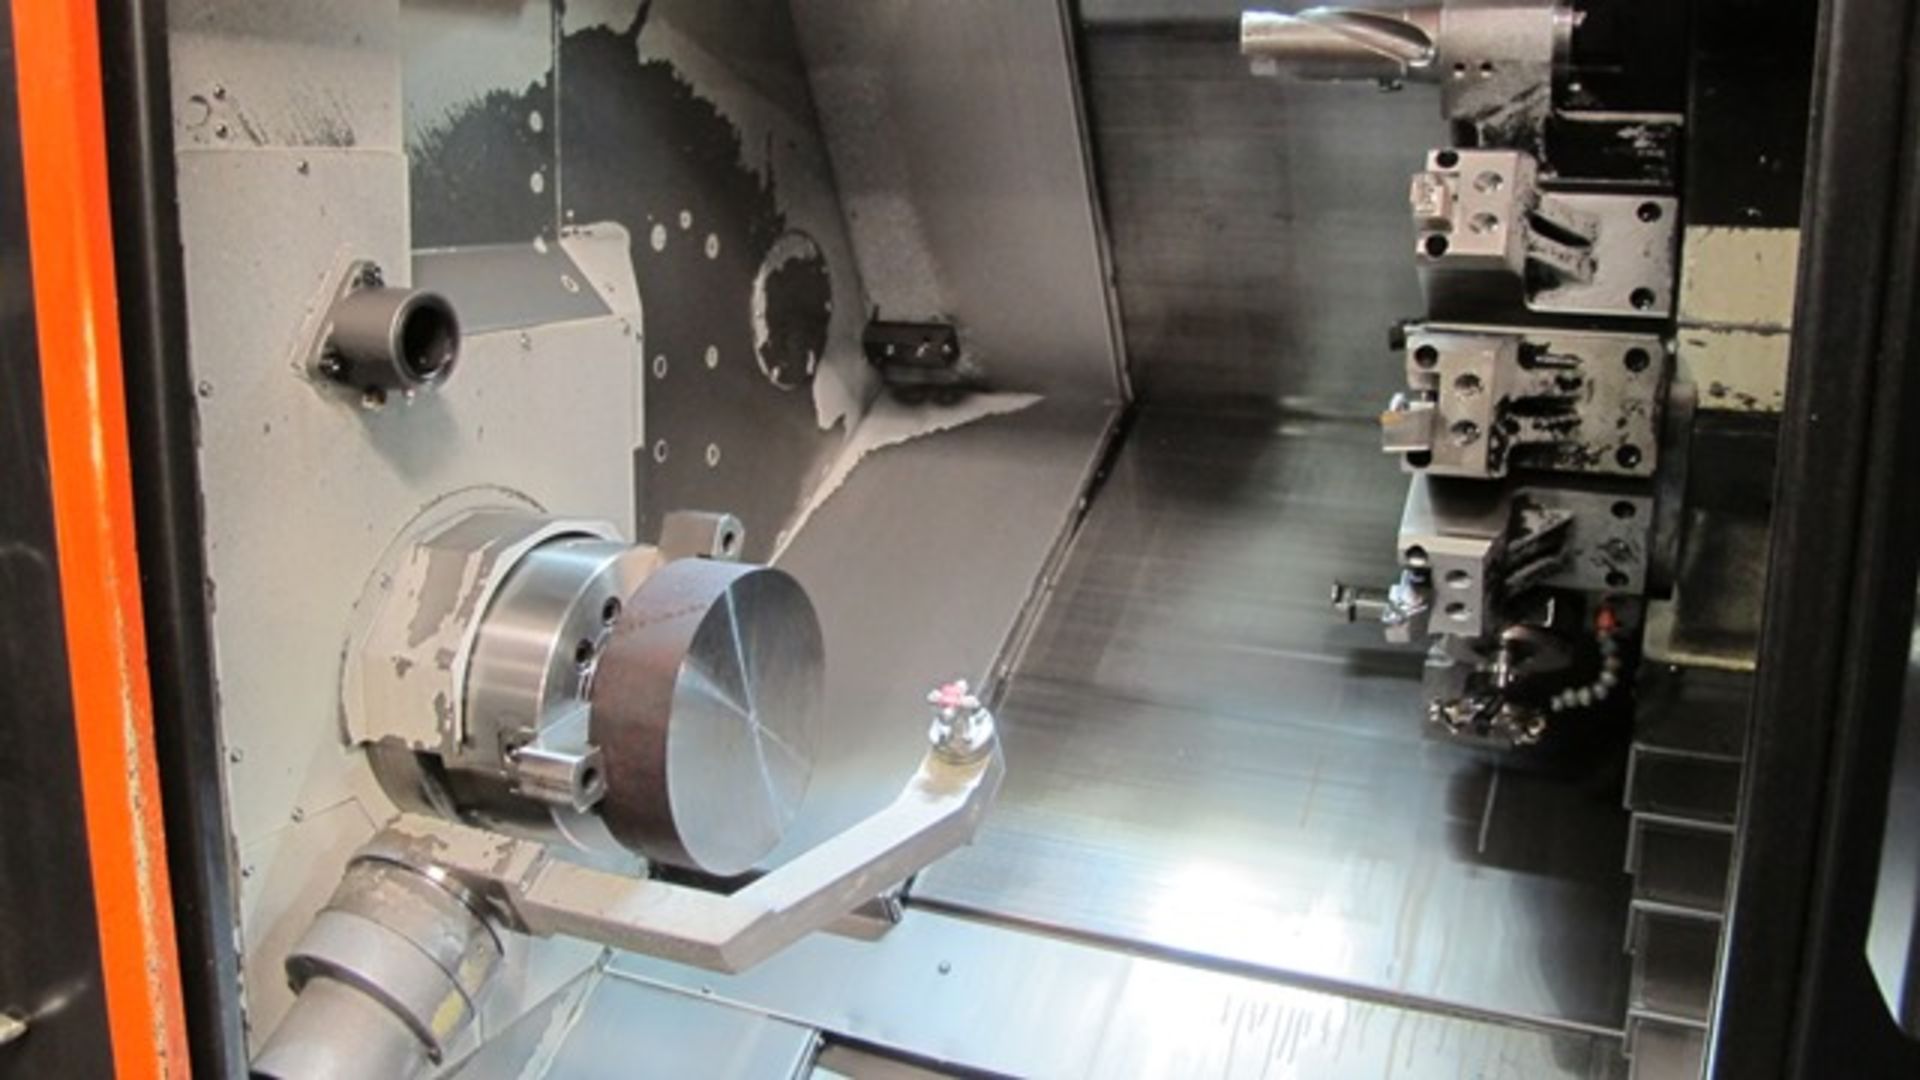 2011 MAZAK QUICK TURN 300M-II CNC TURNING CENTER WITH 10" CHUCK, 6 LIVE TOOLS, TAIL STOCK, S/ - Image 5 of 6